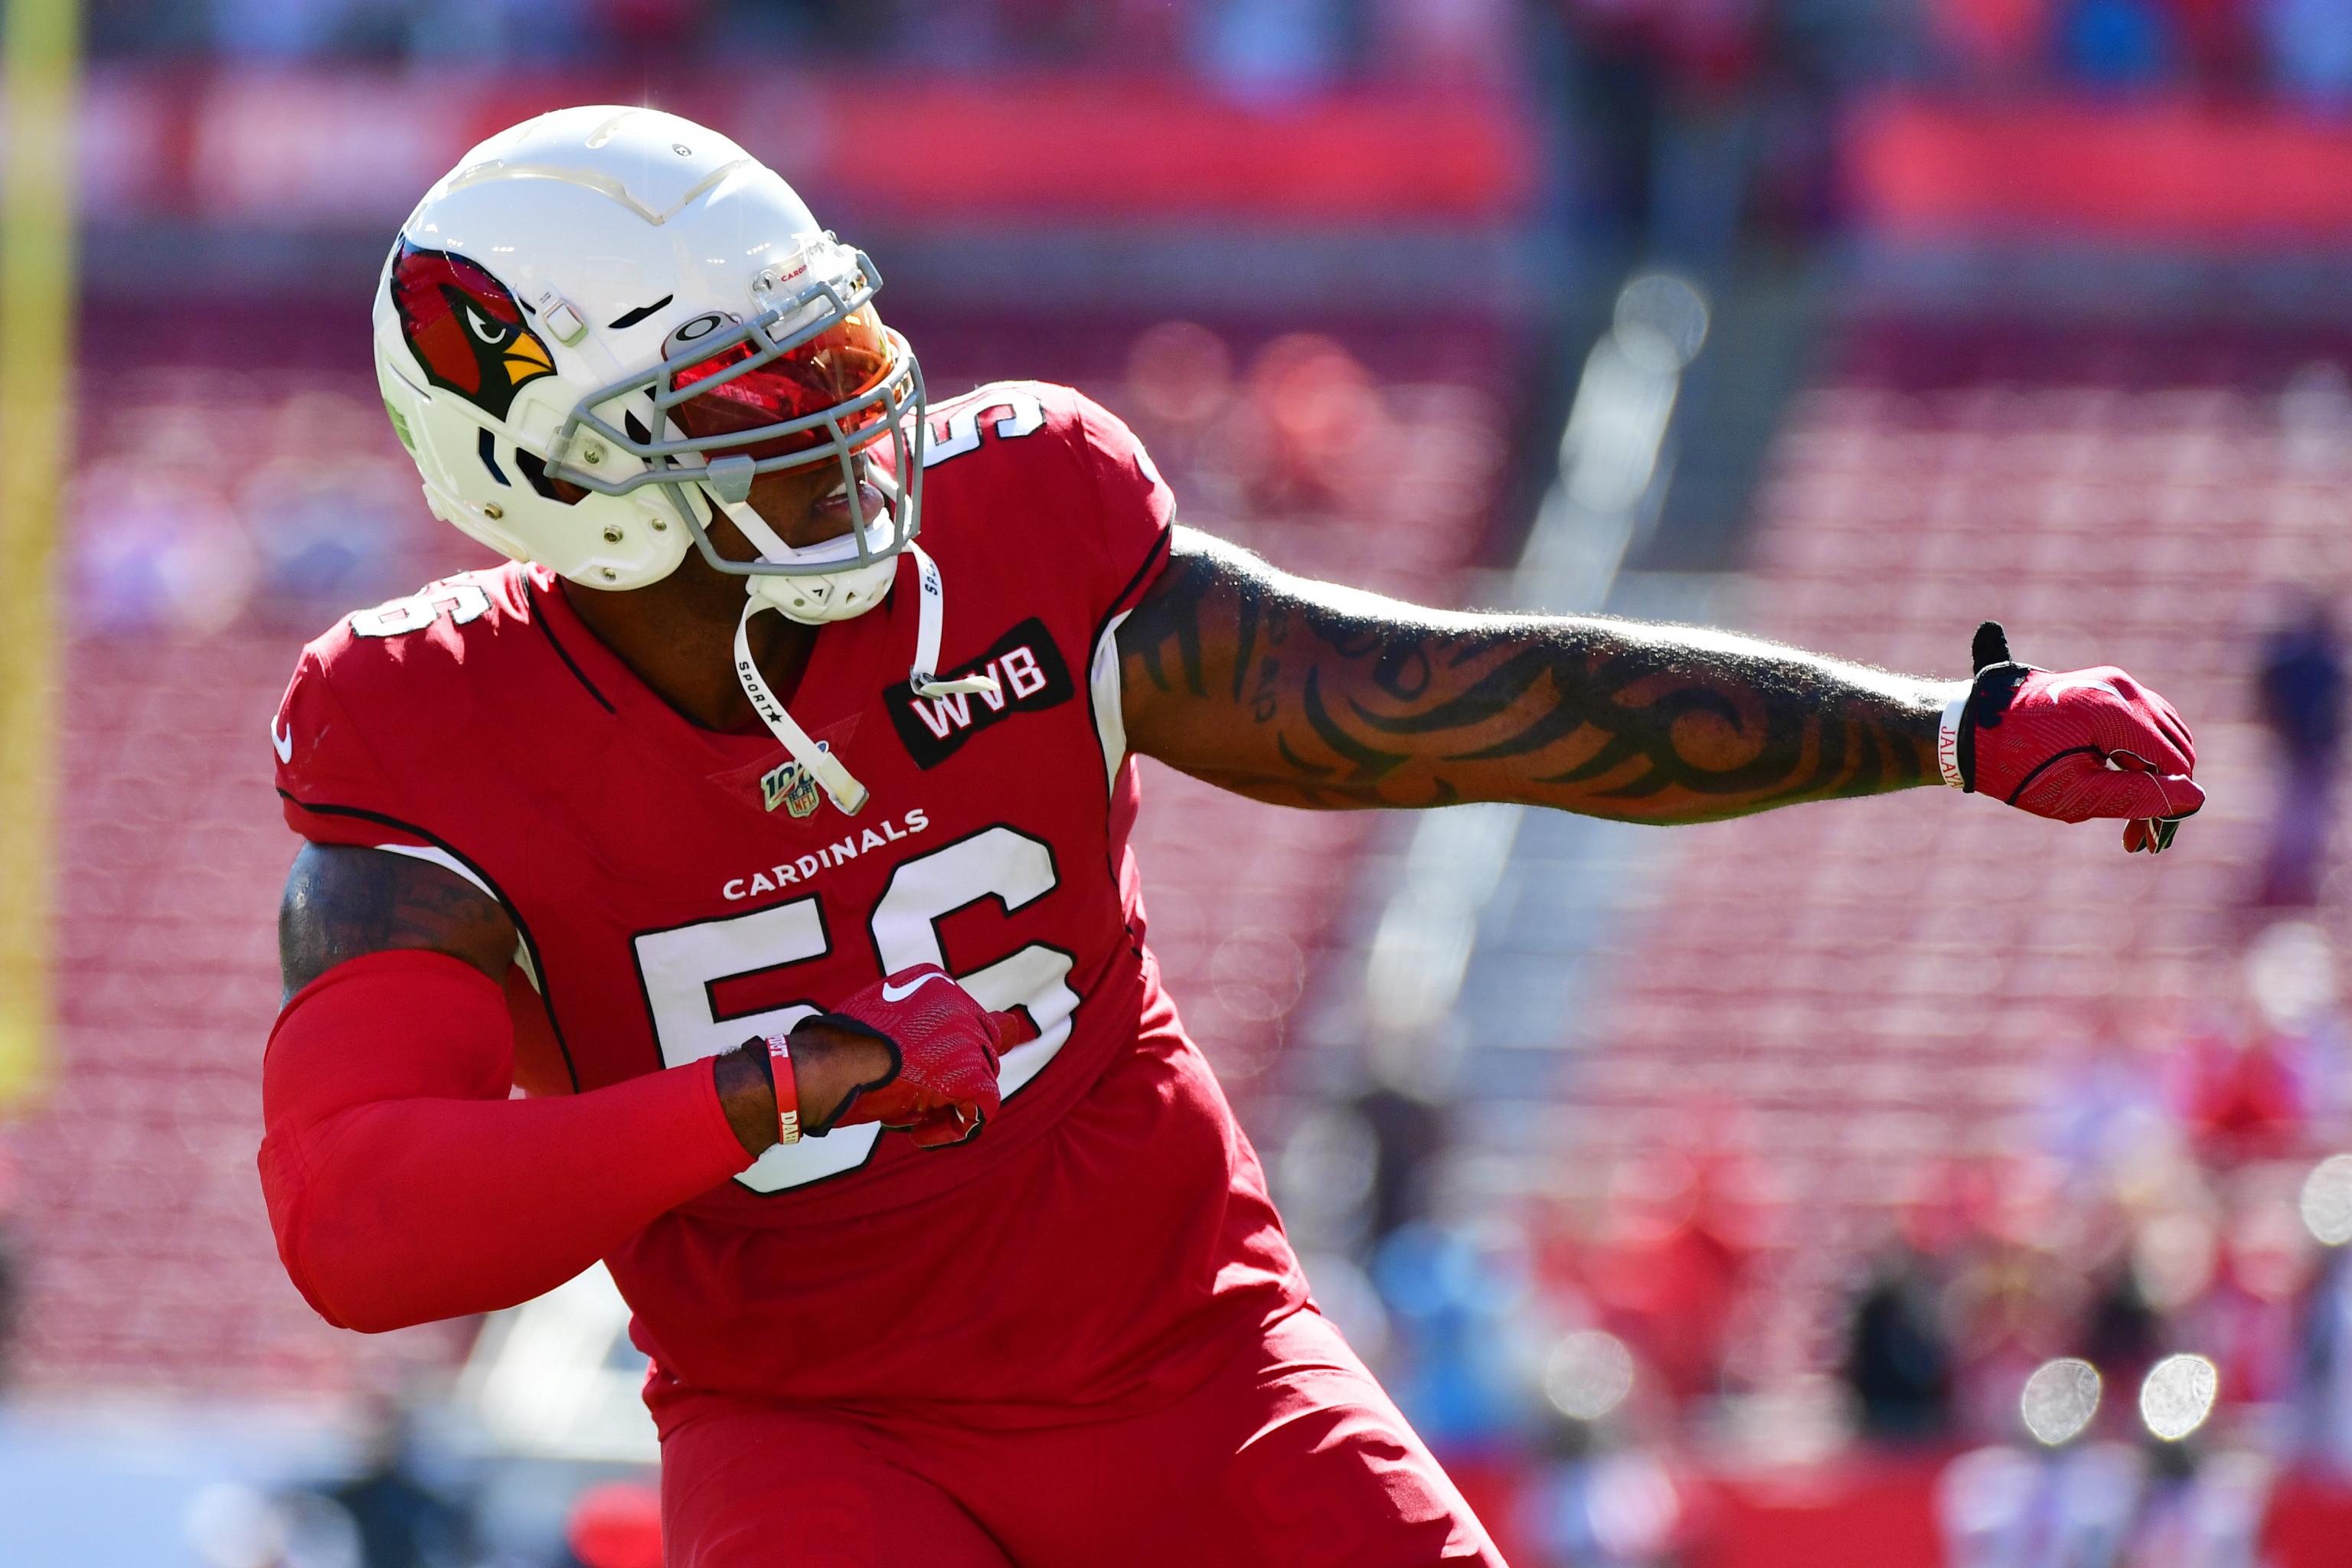 Reports say the Chiefs add former Pro Bowler Terrell Suggs